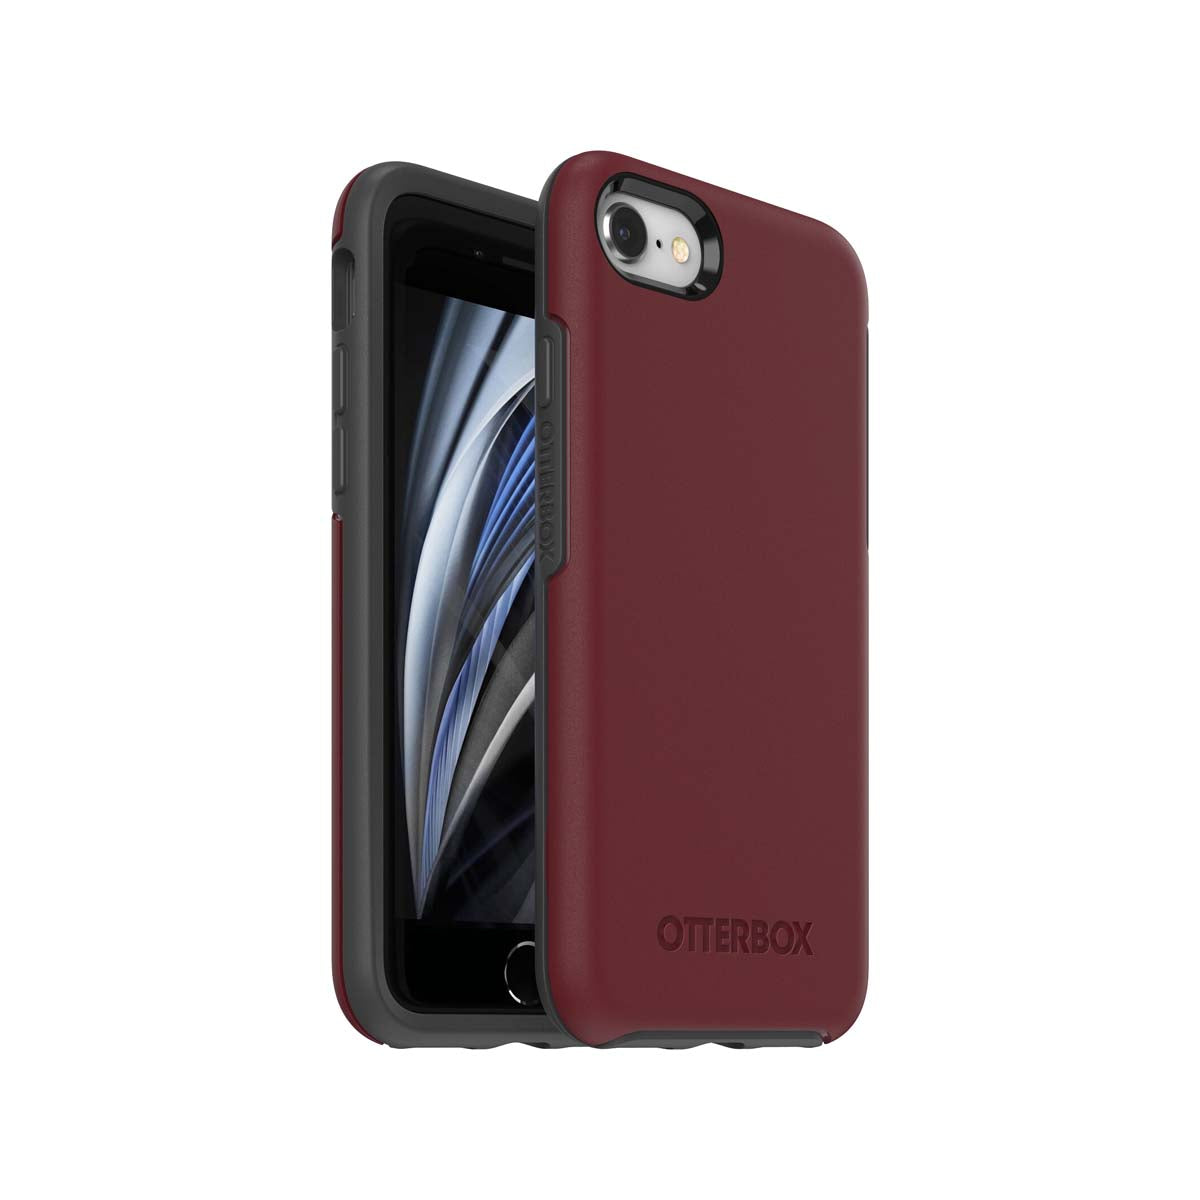 OtterBox Symmetry Phone Case for iPhone 7/8.